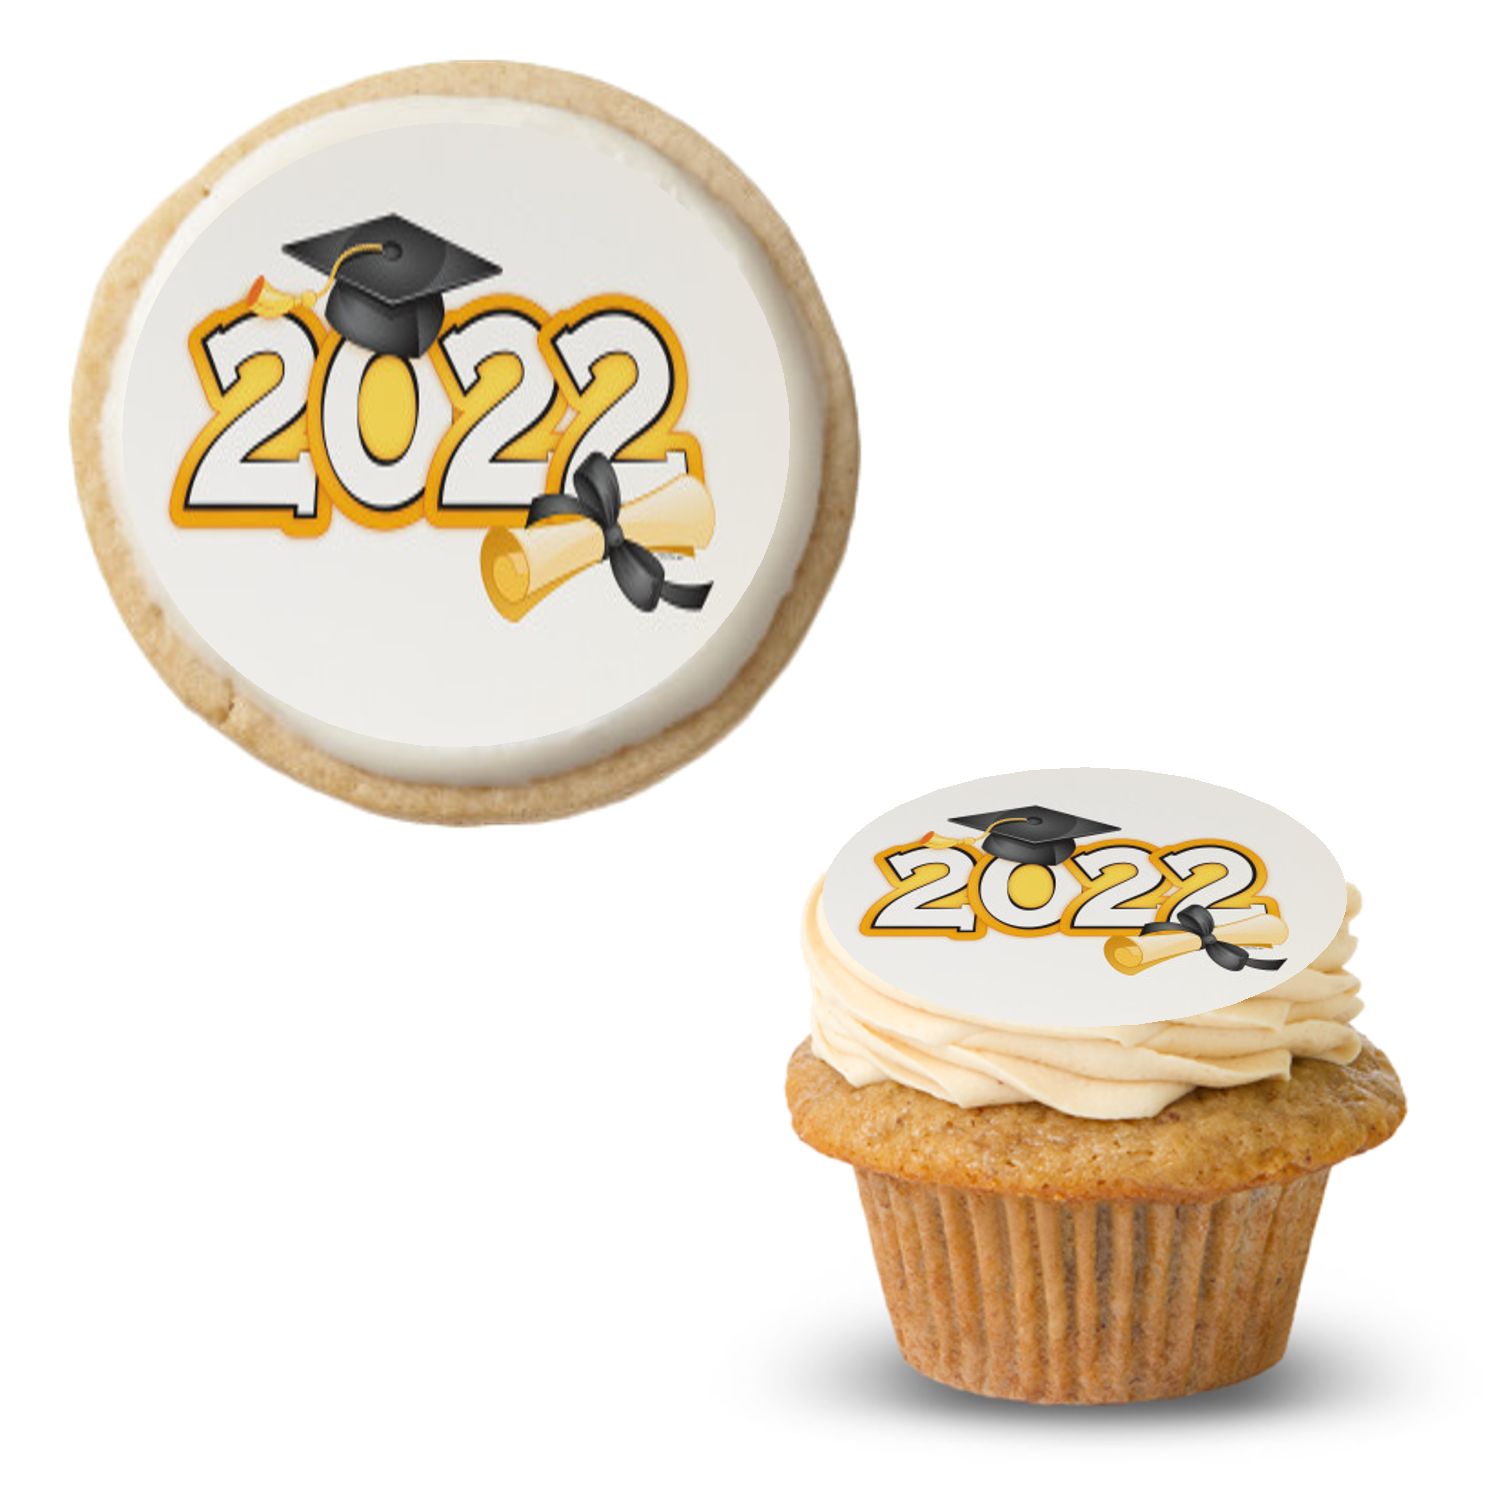 30 x Cup Cake Edible Cake Topper Edible Rice Paper Graduation Party